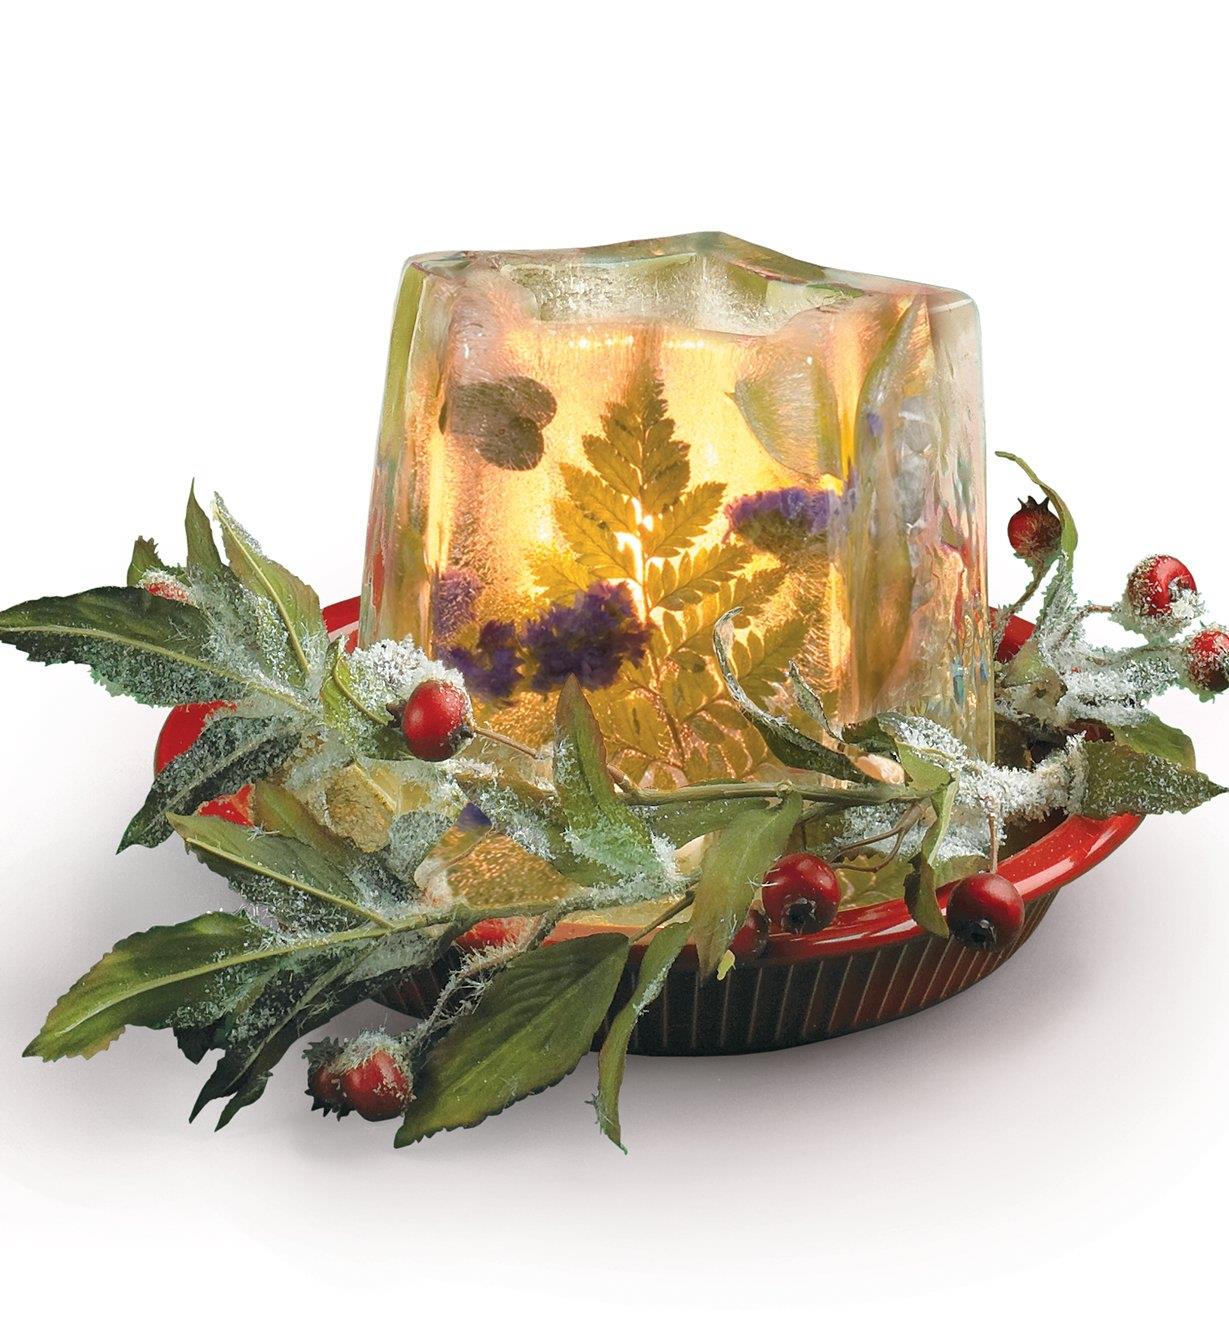 Ice Lantern used as a centerpiece with flowers and greenery frozen inside